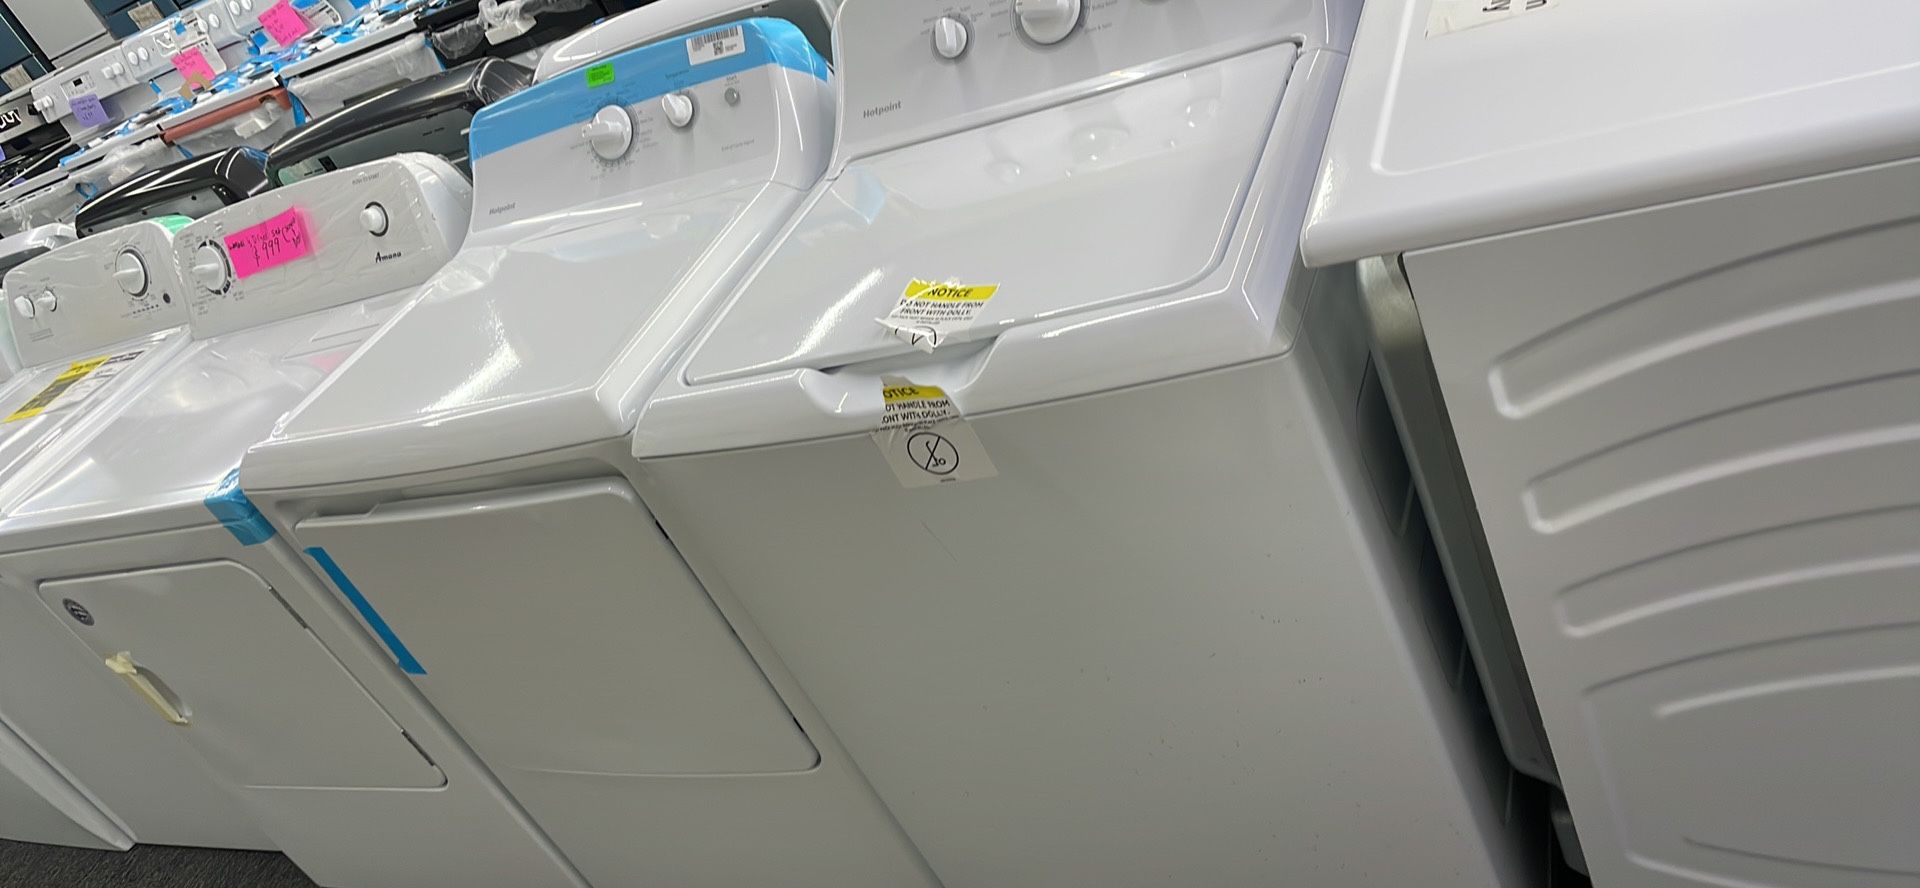 Washer And Dryer Scratch And Dent On Sale For Only $999